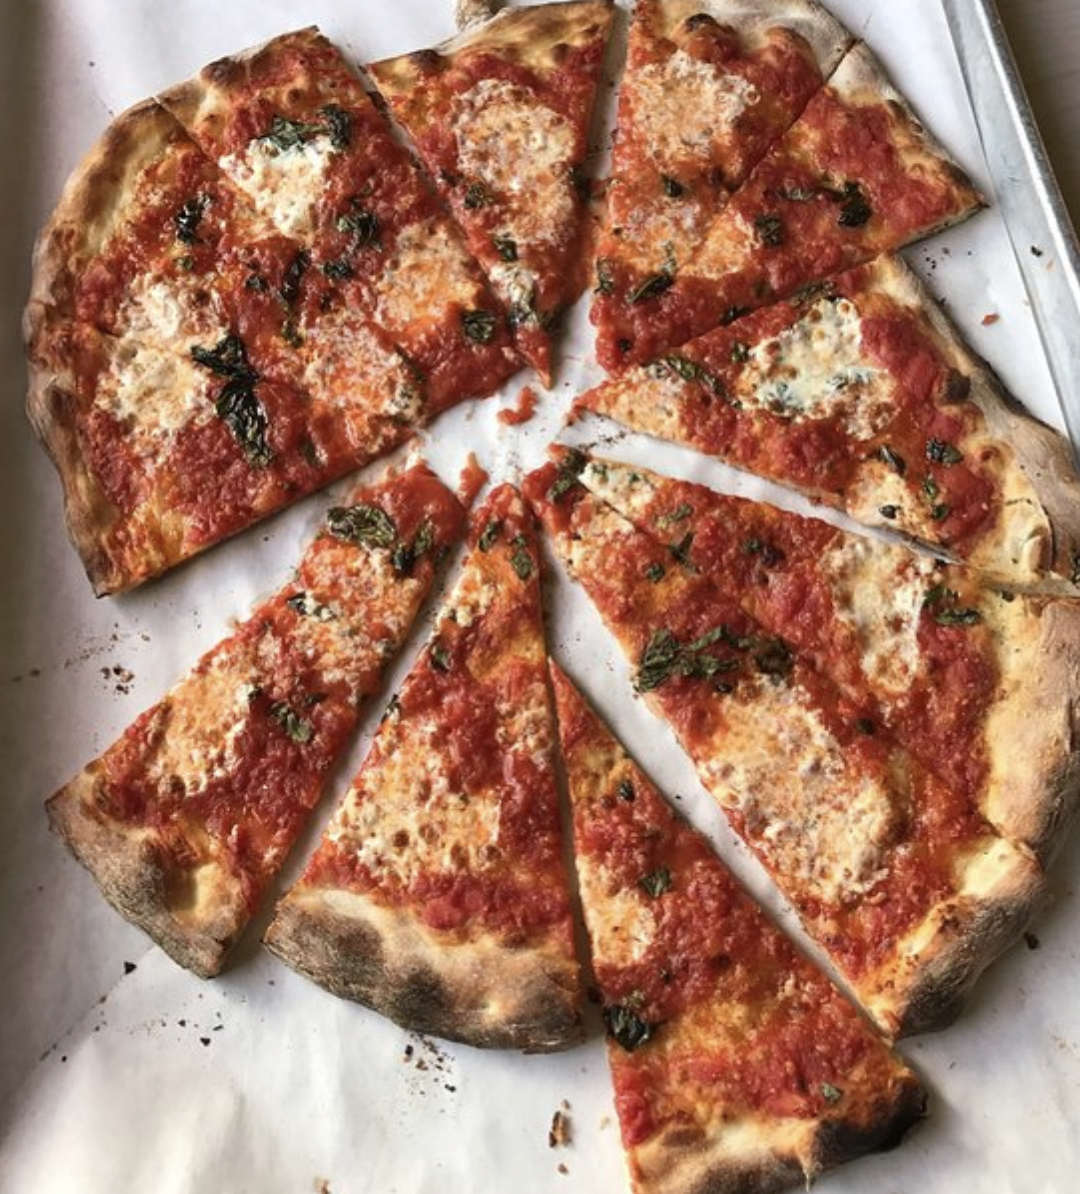 <p><b>Region</b><b>: </b>Connecticut, Massachusetts, Rhode Island, and New York</p><p><a href="https://www.pepespizzeria.com">Frank Pepe</a> is the champion of New Haven-style pizza, since it originated there way back in 1925. The restaurant's namesake and founder was an Italian immigrant who started firing pizzas in a coal-fired brick oven for a deeply charred, crisp yet chewy crust that consistently ranks as one of the <a href="https://www.thedailymeal.com/eat/101-best-pizzas-america-2020/slide-102">best in the U.S</a>. The original tomato pie (with or without anchovies) is the classic, but the unique white clam pizza is just as popular, topped with fresh clams, garlic, romano cheese, oregano and olive oil. </p>